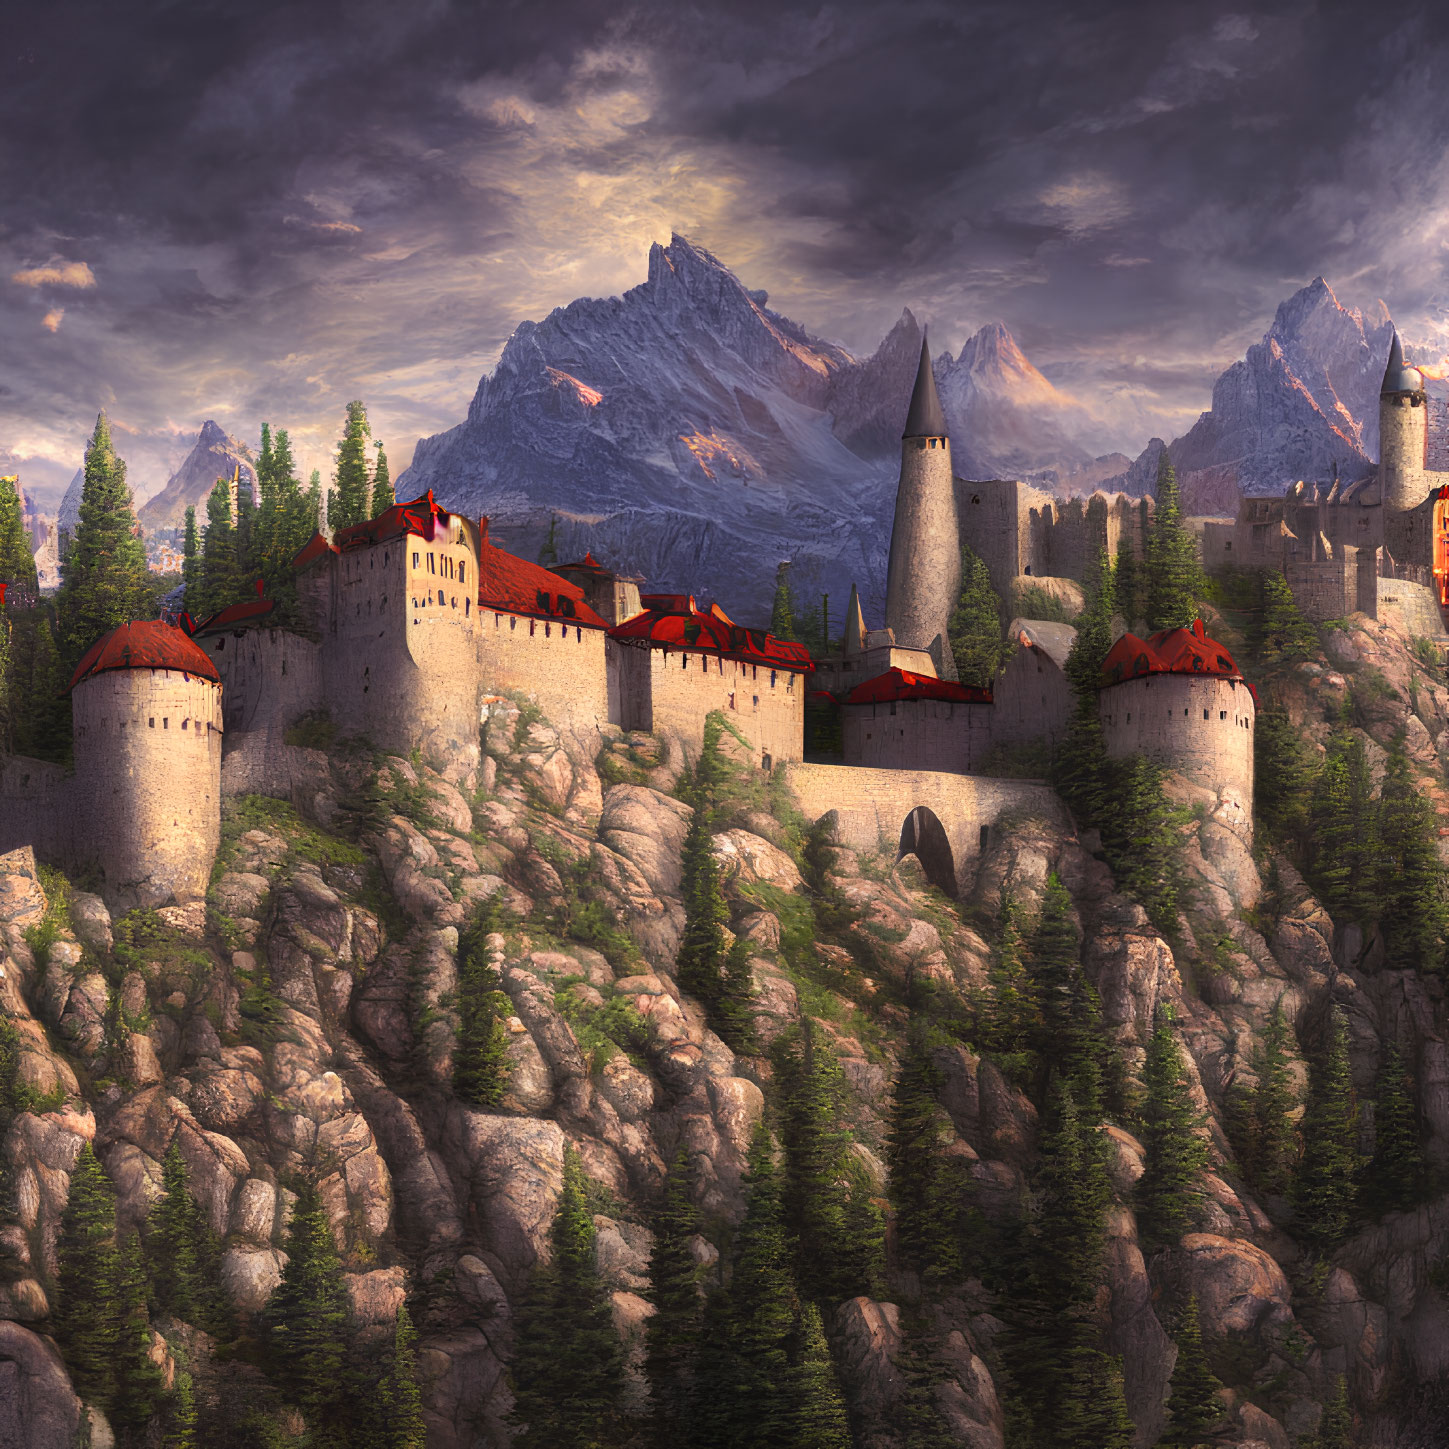 Medieval castle with red rooftops on rugged cliff amid mountains & greenery